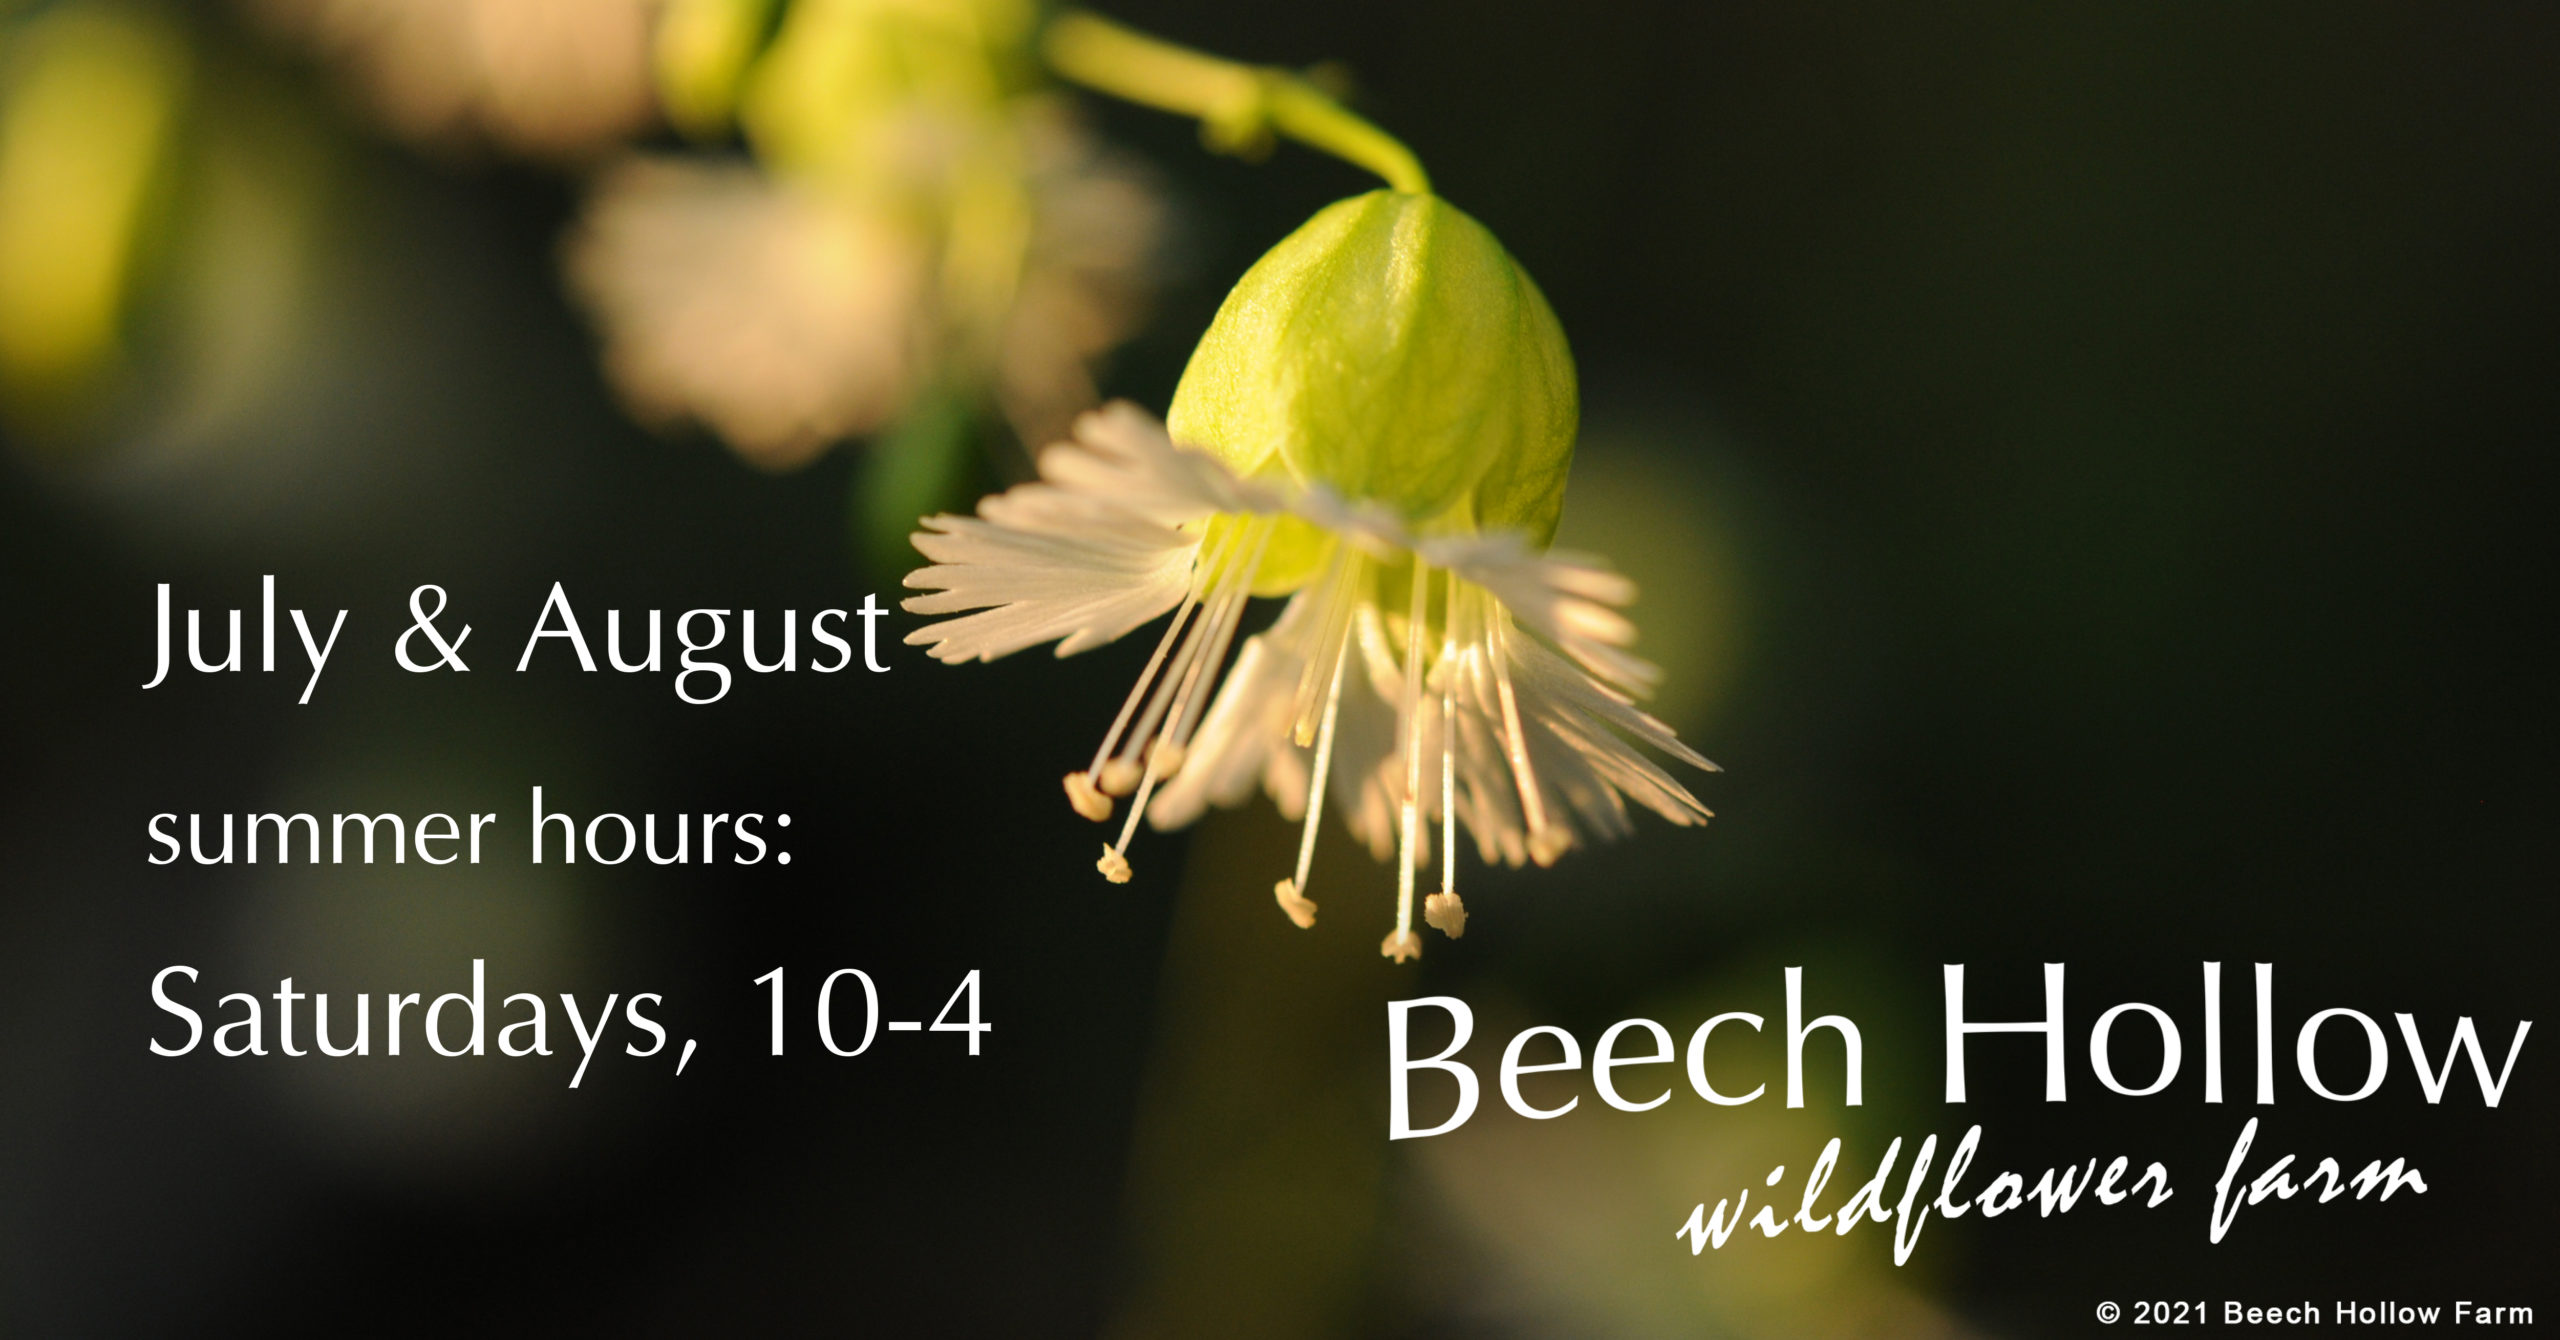 Beech Hollow wildflower farm July and August summer hours: Saturdays 10am-4pm